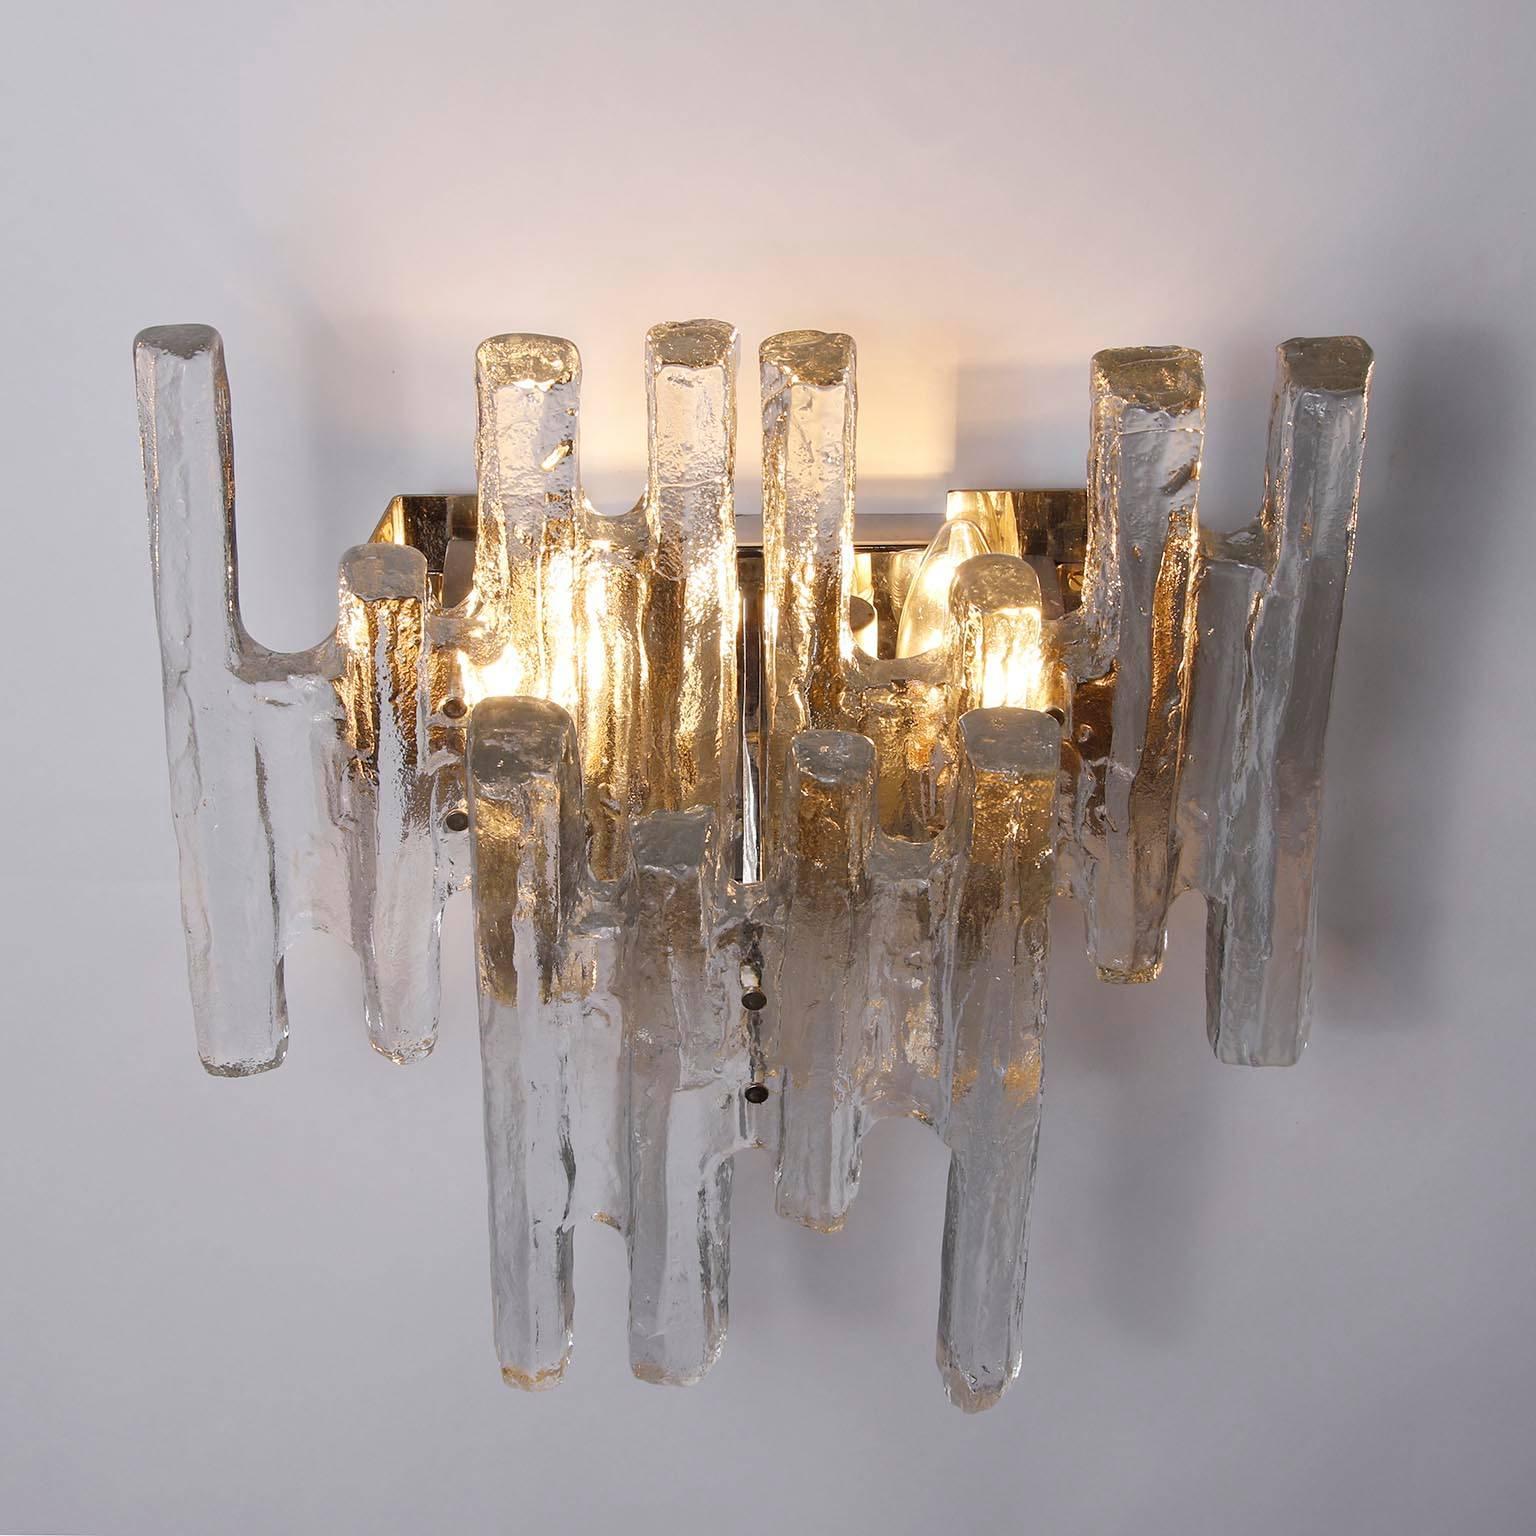 Pair of Kalmar Sconces Wall Lights 'PAN', Glass Nickel, 1970s, 1 of 3 Pairs For Sale 4